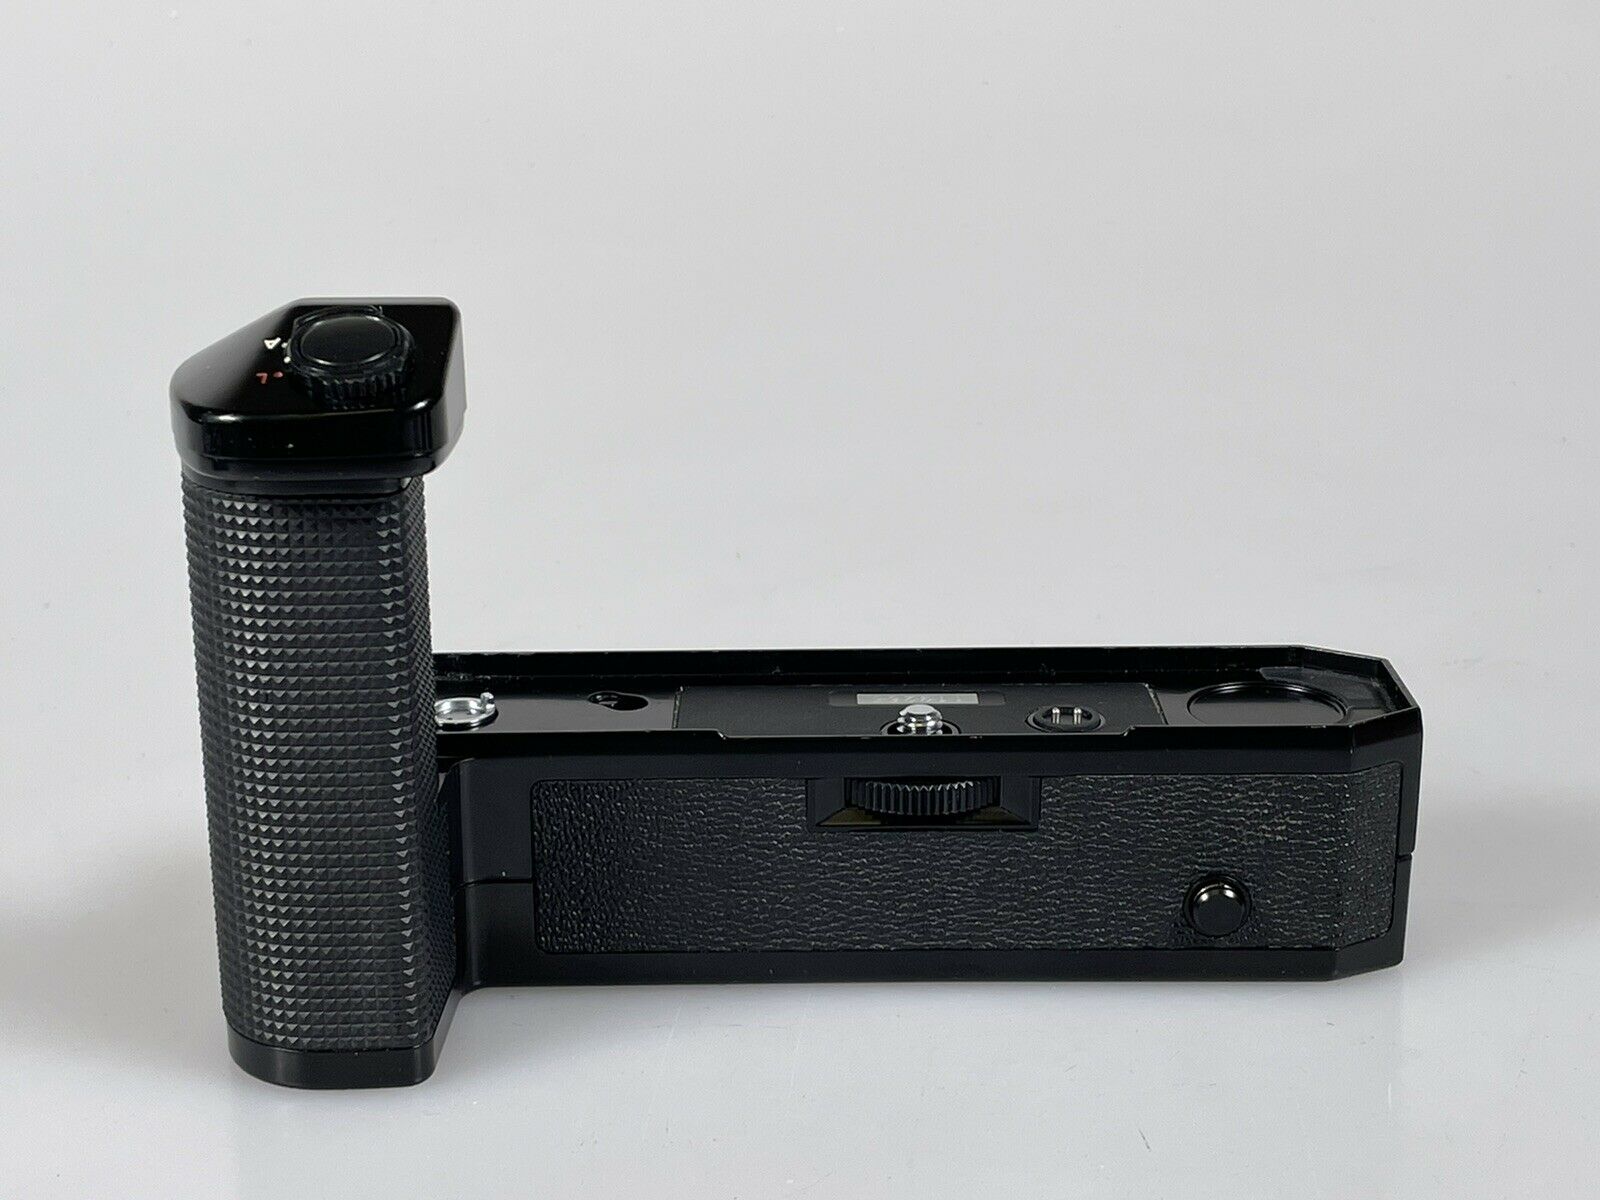 Canon Power Winder F for F-1 Camera